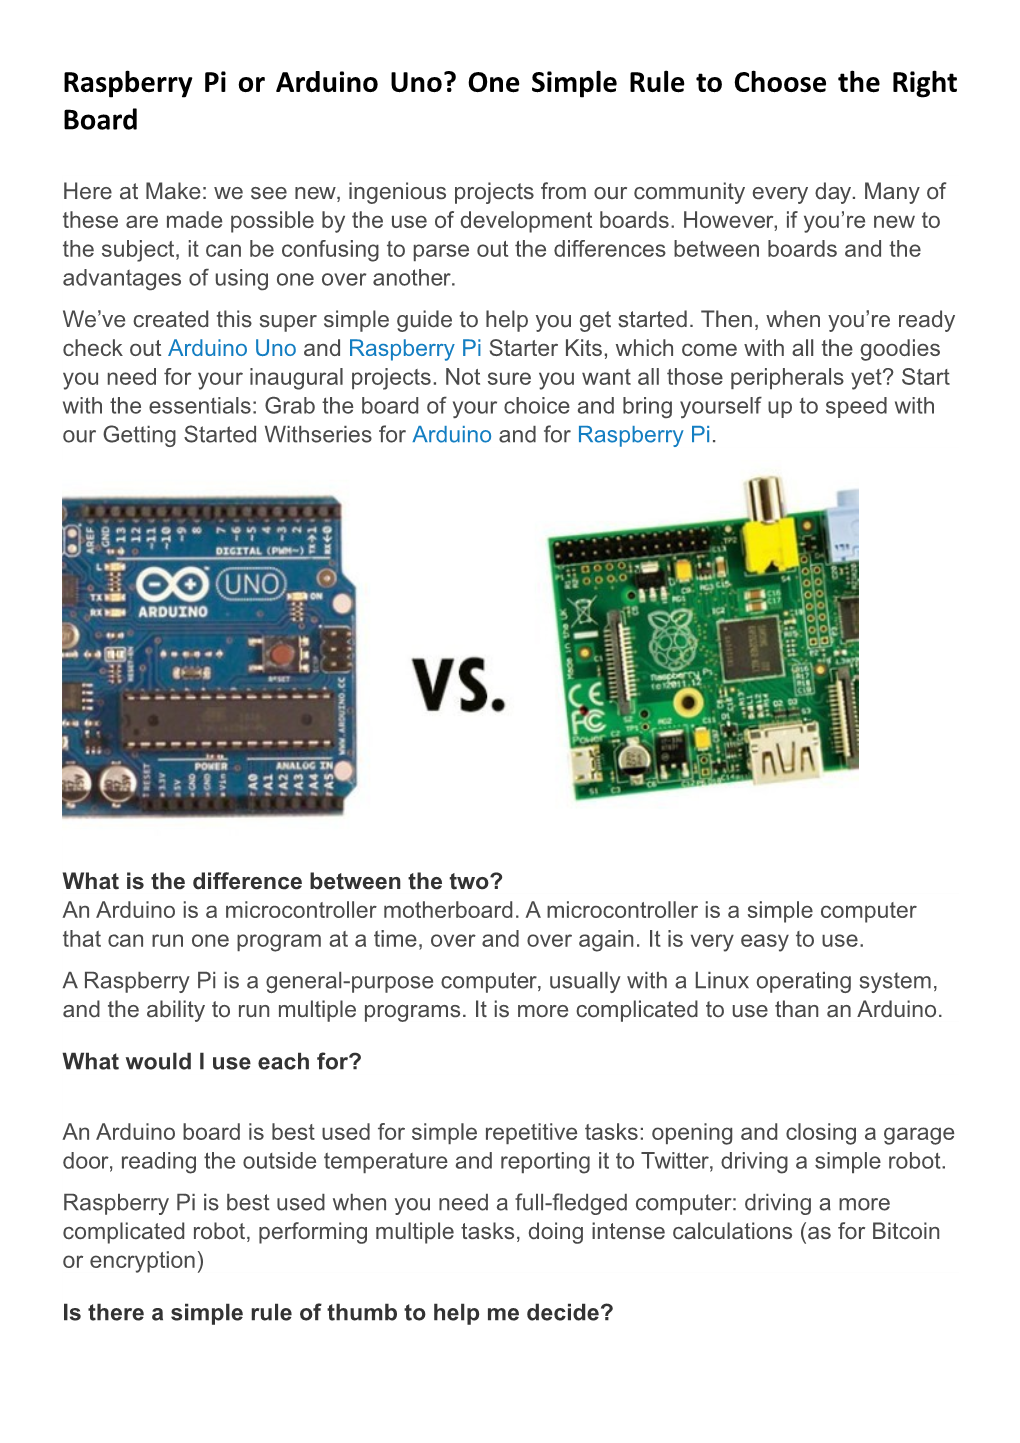 Raspberry Pi Or Arduino Uno One Simple Rule to Choose the Right Board